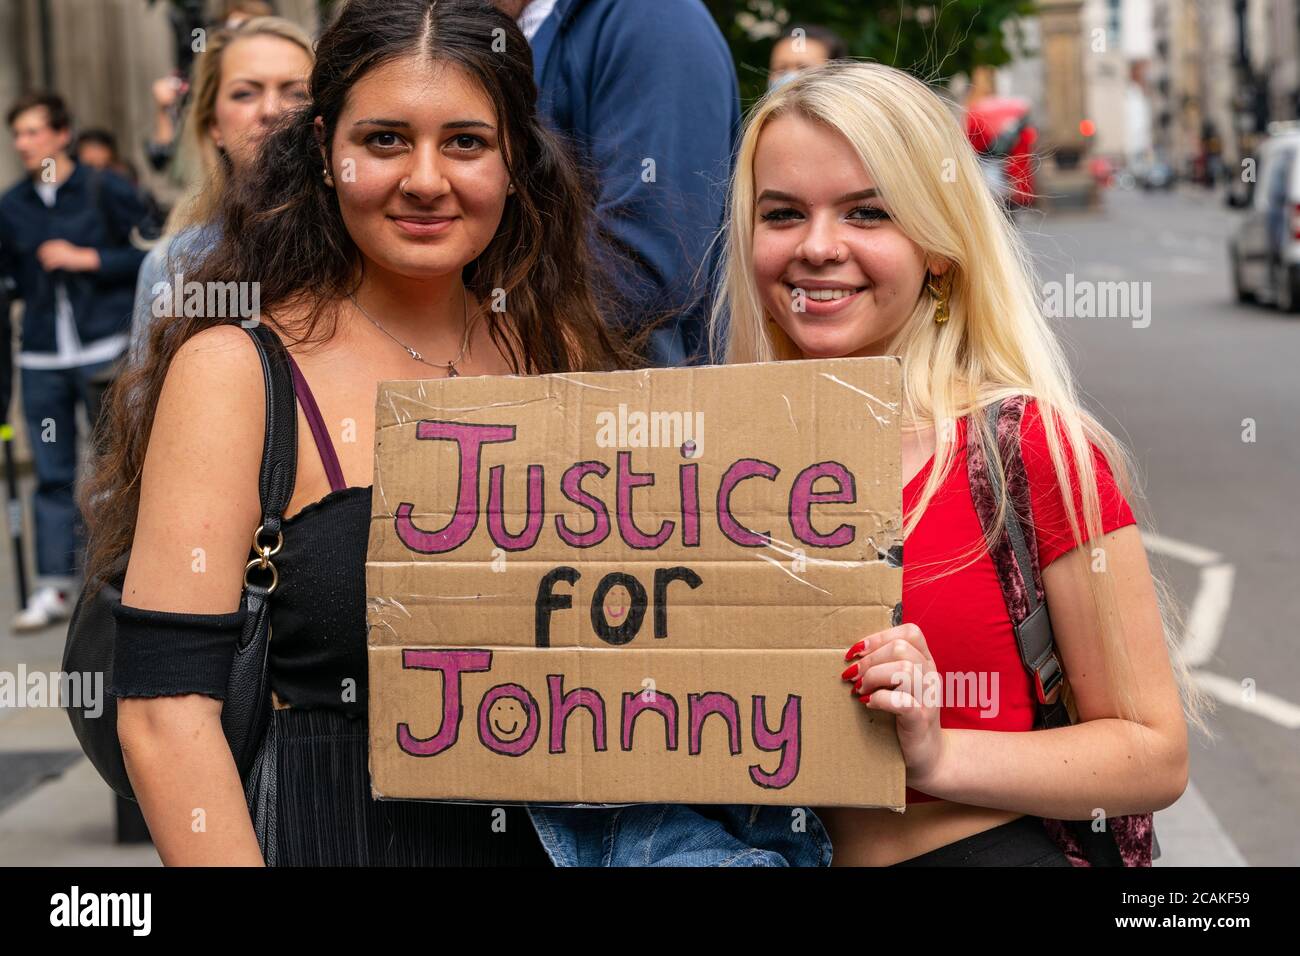 LONDON, ENGLAND - JULY 28, 2020: Beautiful female supporters holding a banner for Johnny Depp fan outside the High Court in London during his Court ca Stock Photo